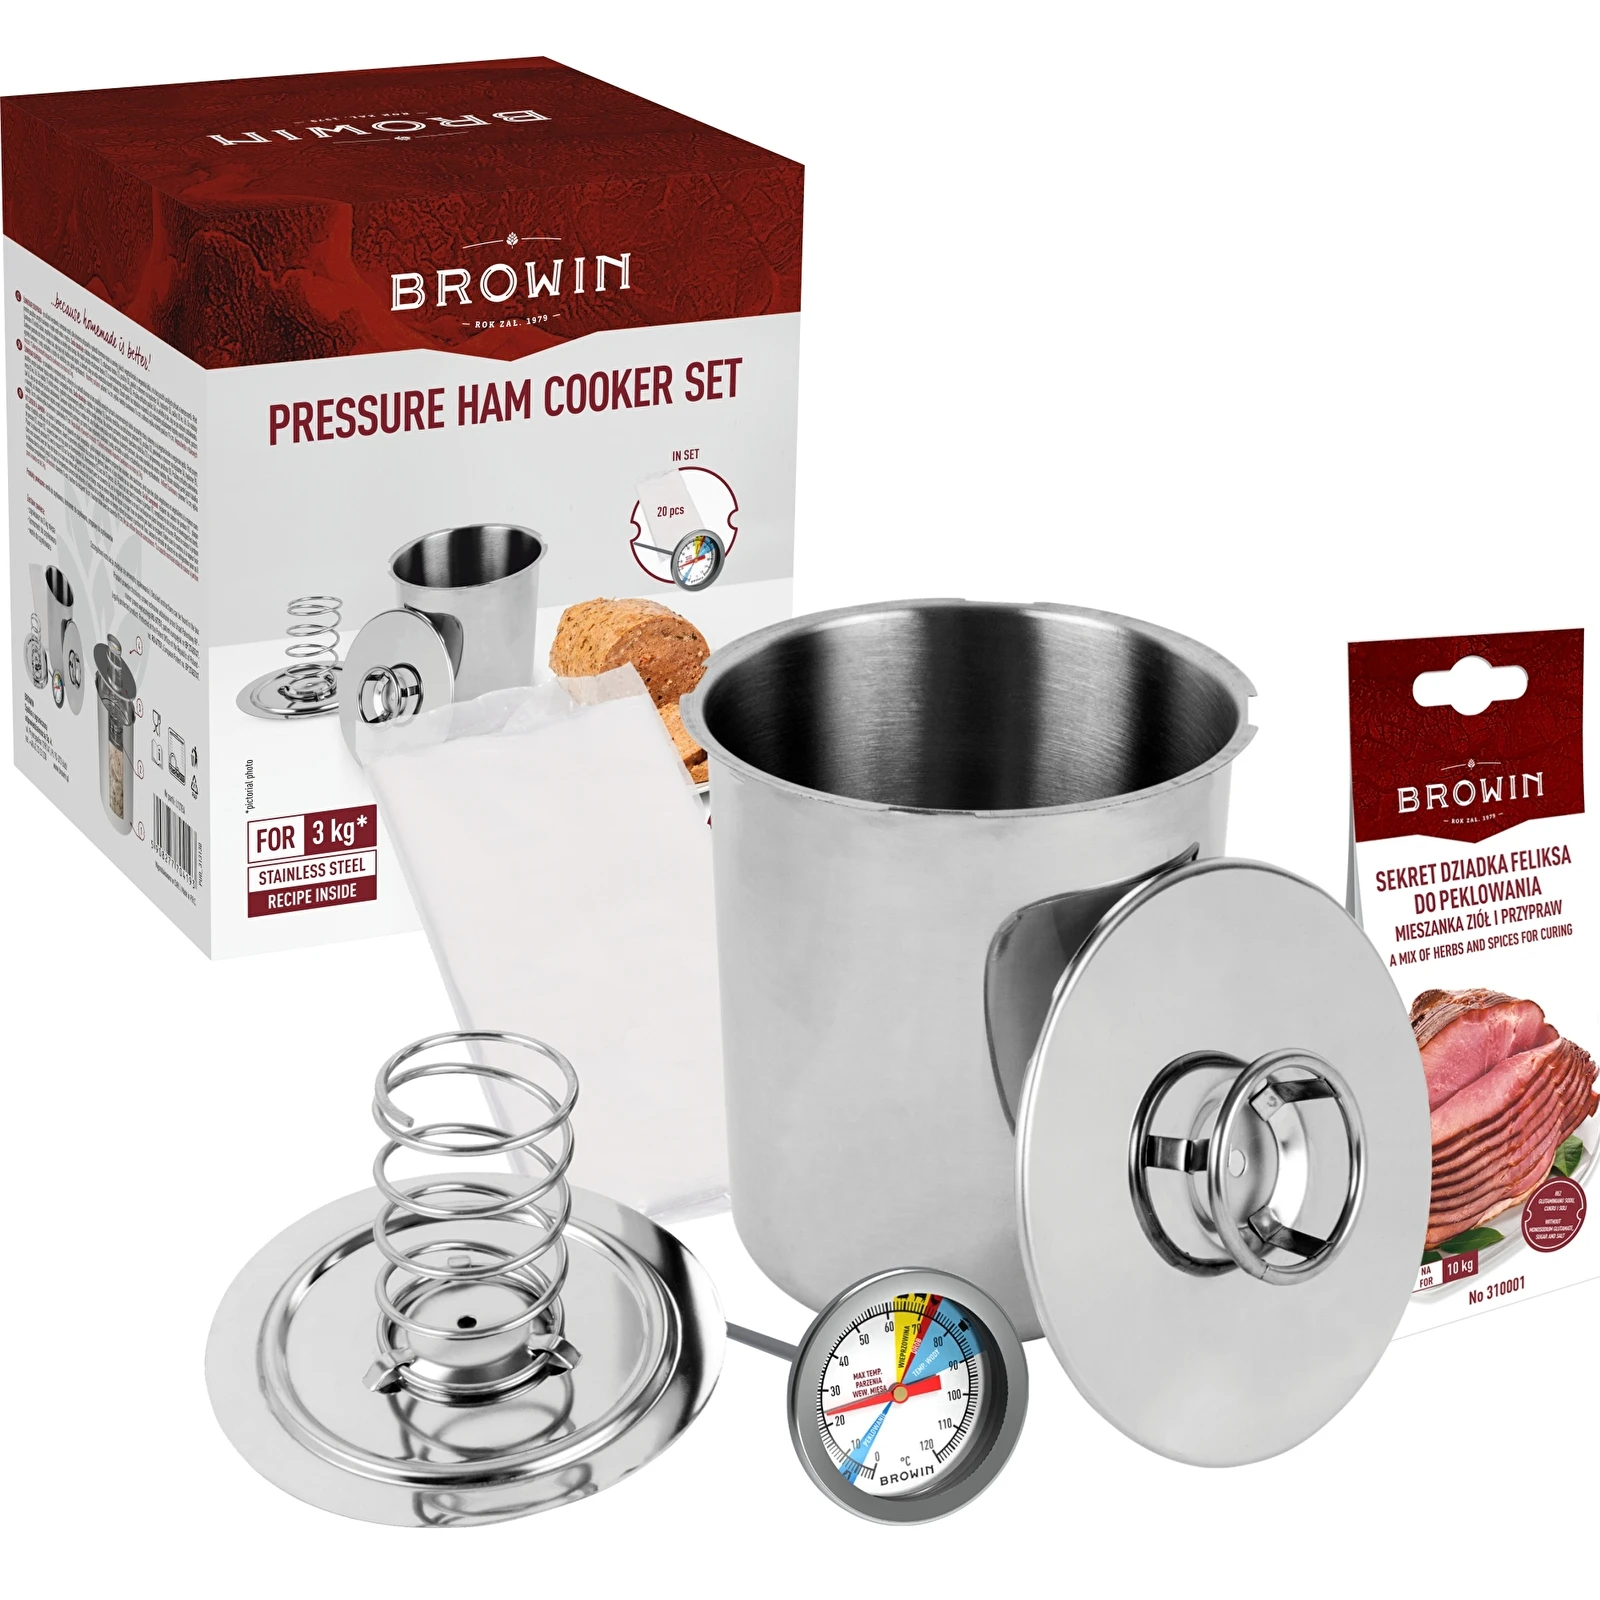 Meao Stainless Steel Ham Sandwich Meat Press Maker for Making Healthy Homemade Deli Meat Come - Kitchen Bacon Meat Pressure Cookers Boiler Pot Pan